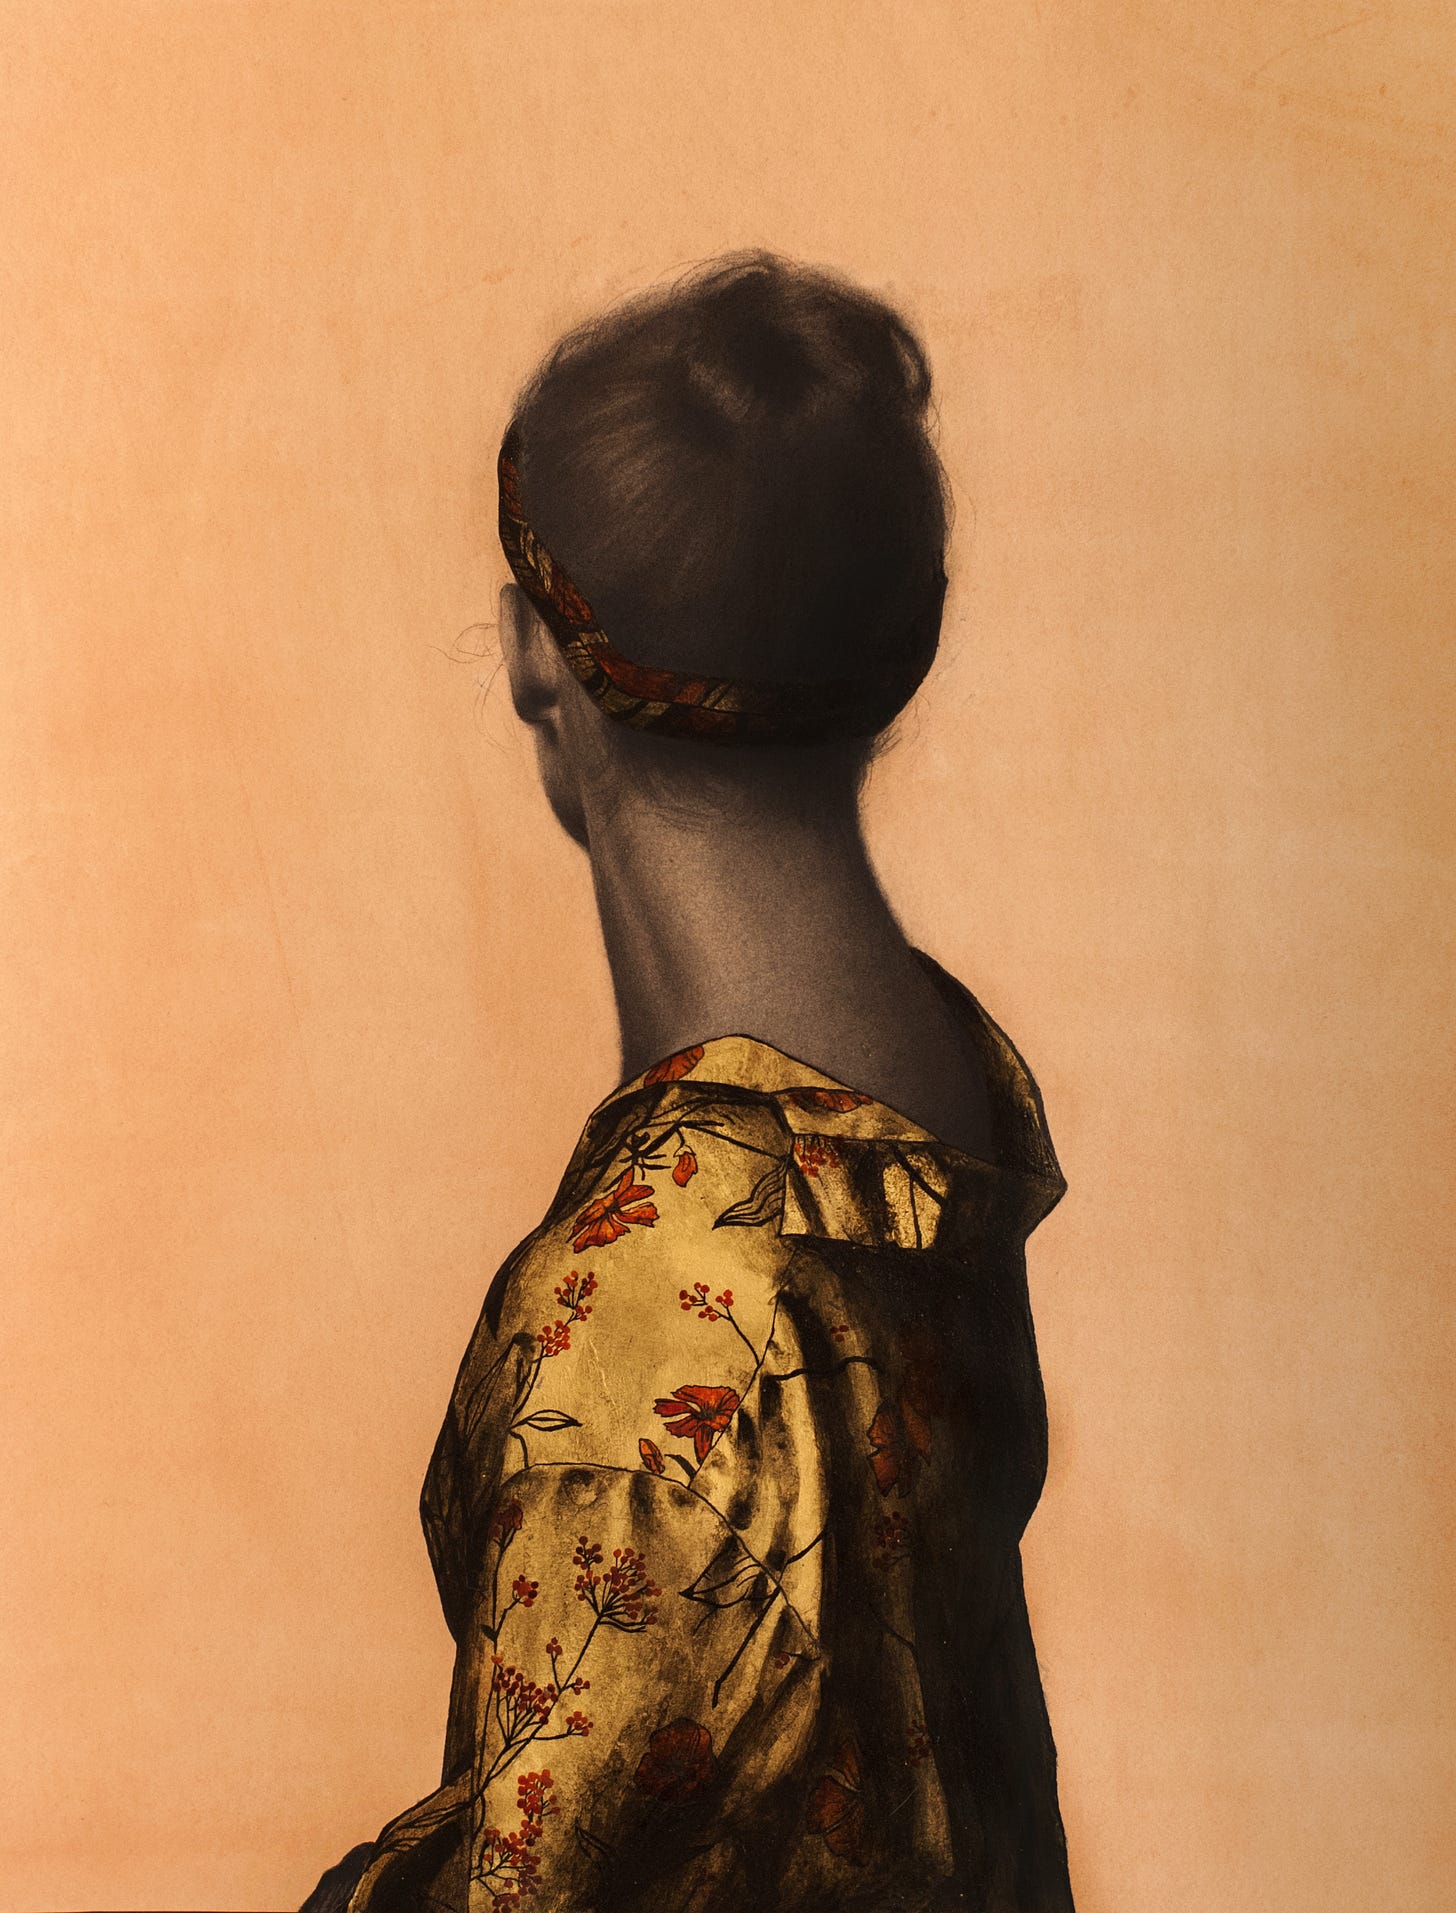 A portrait where the back of the head is facing us and she is wearing a beautiful detailed gold and red floral top. Her hair is up in a bun and the background is a pale pink 